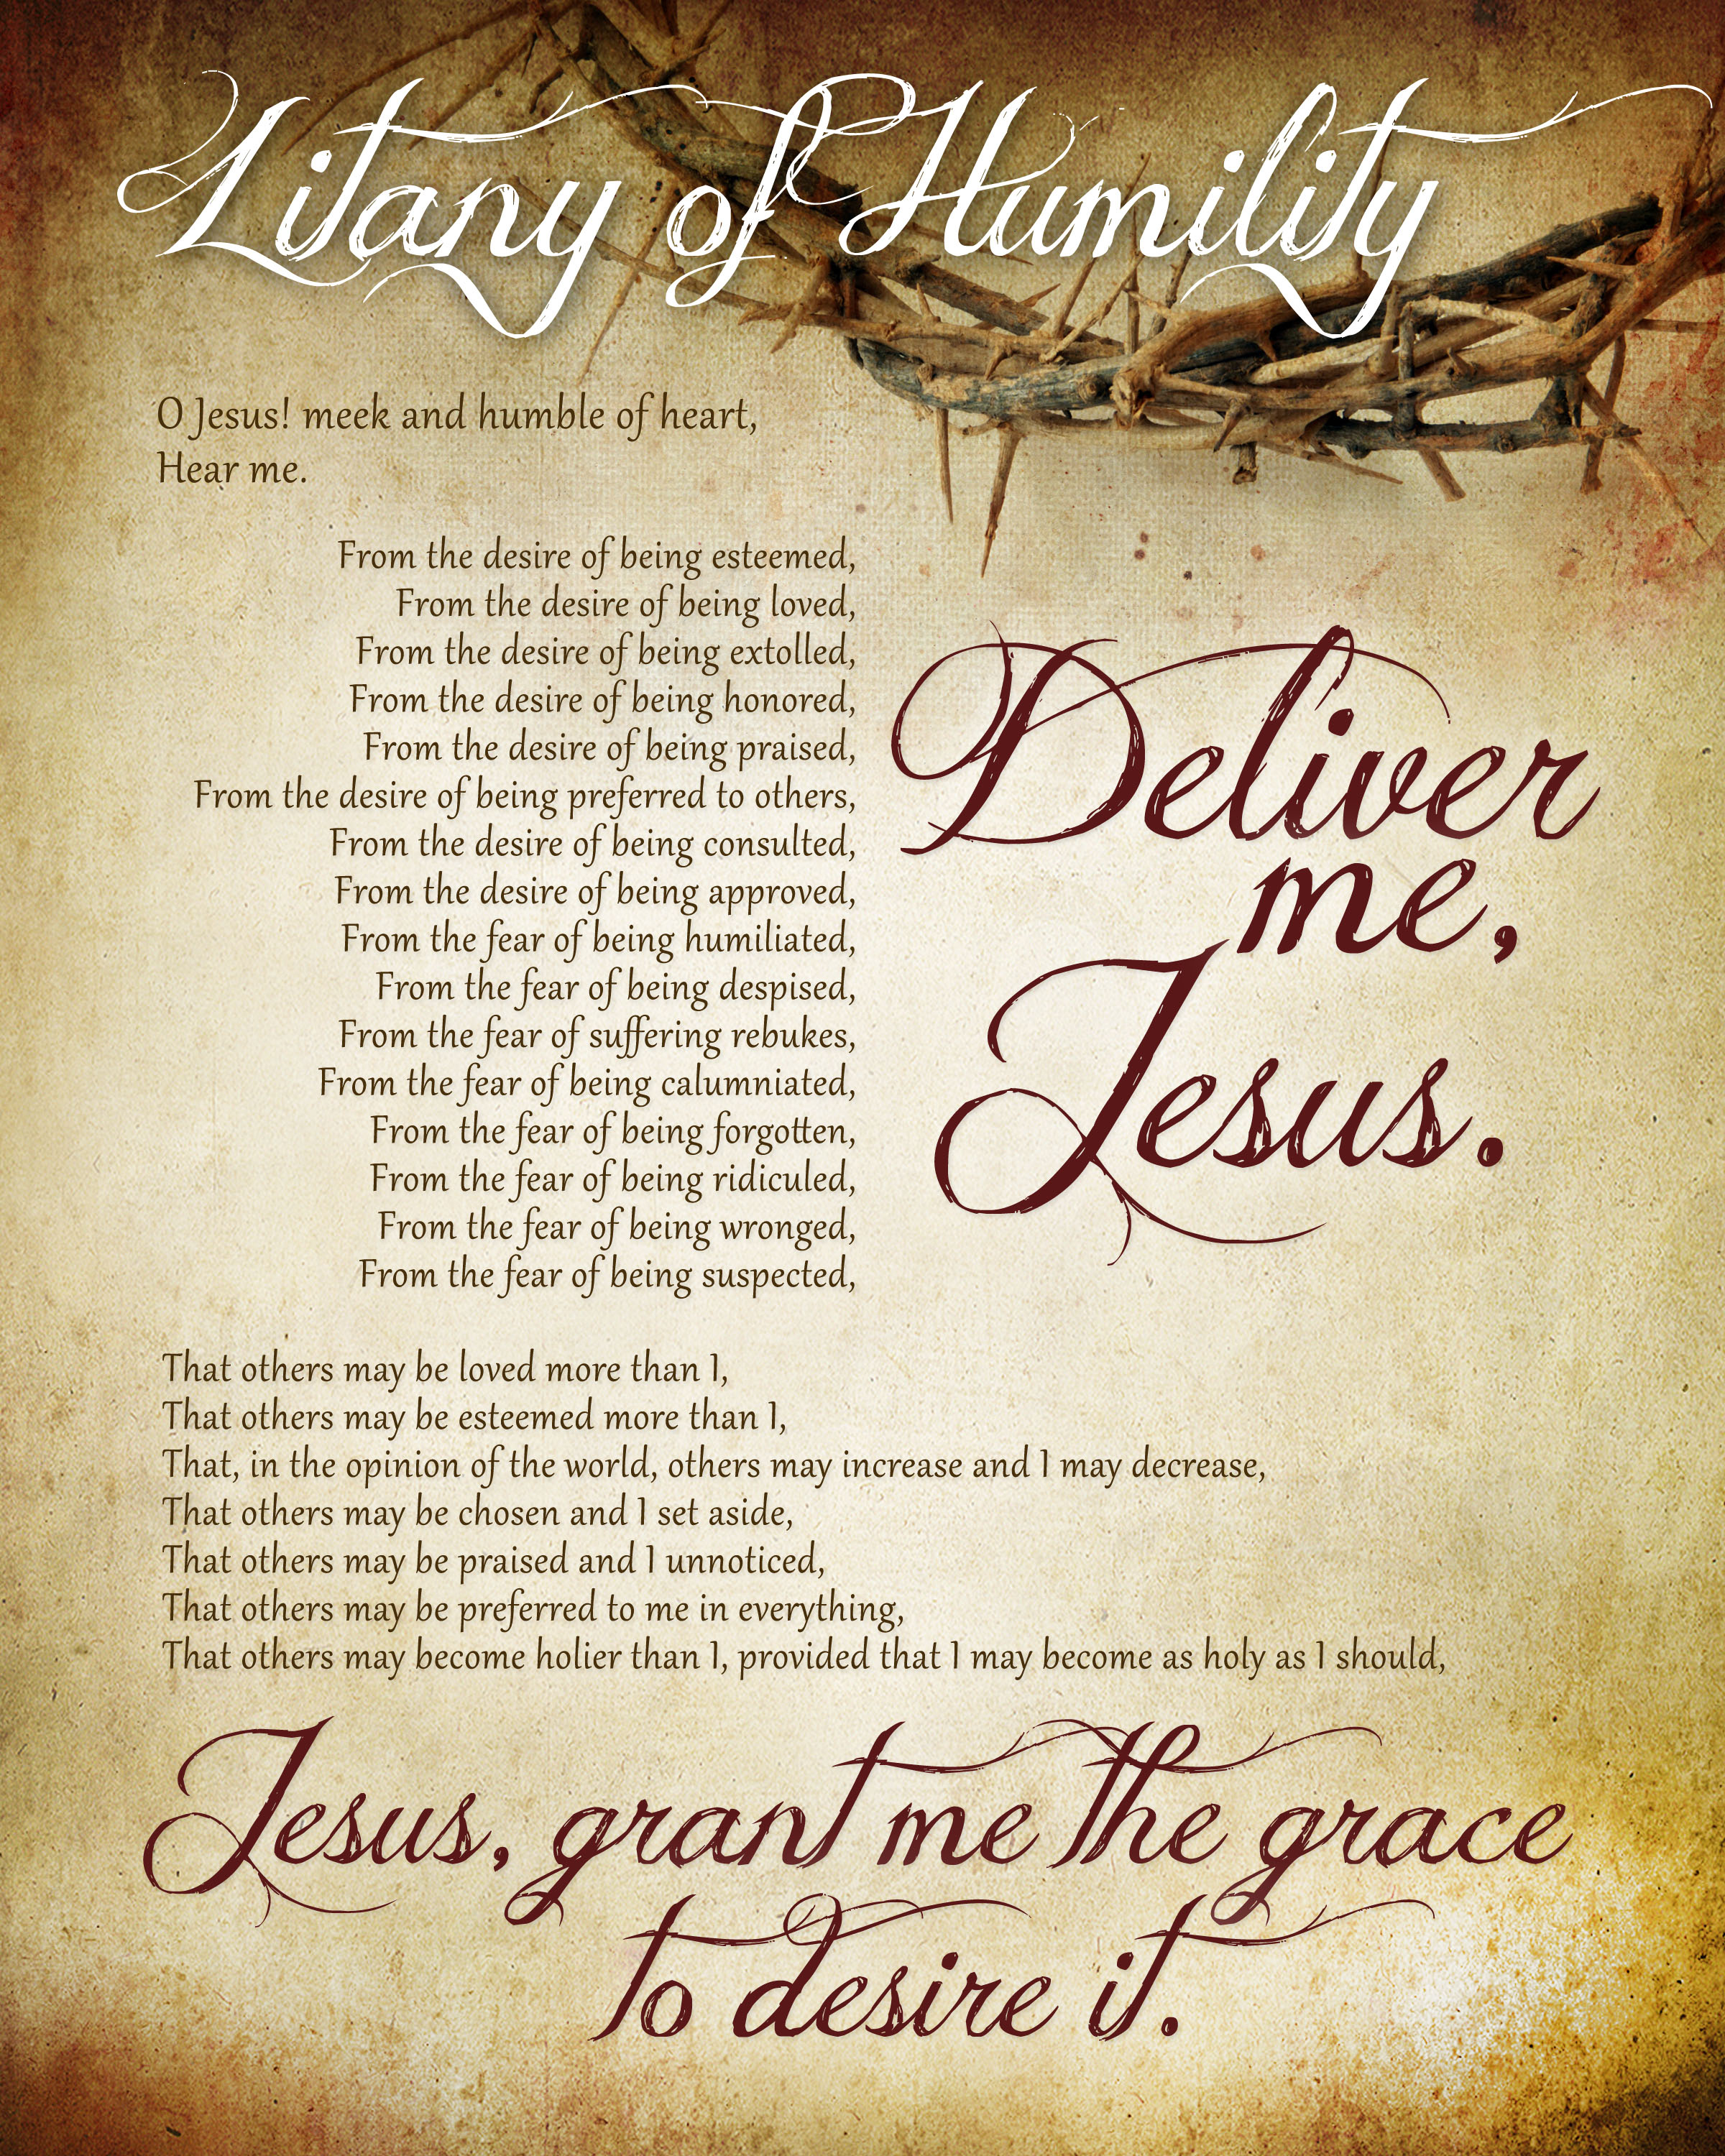 Litany Of Humility Free Printable - How To Nest For Less™ - Free Printable Catholic Prayer Cards